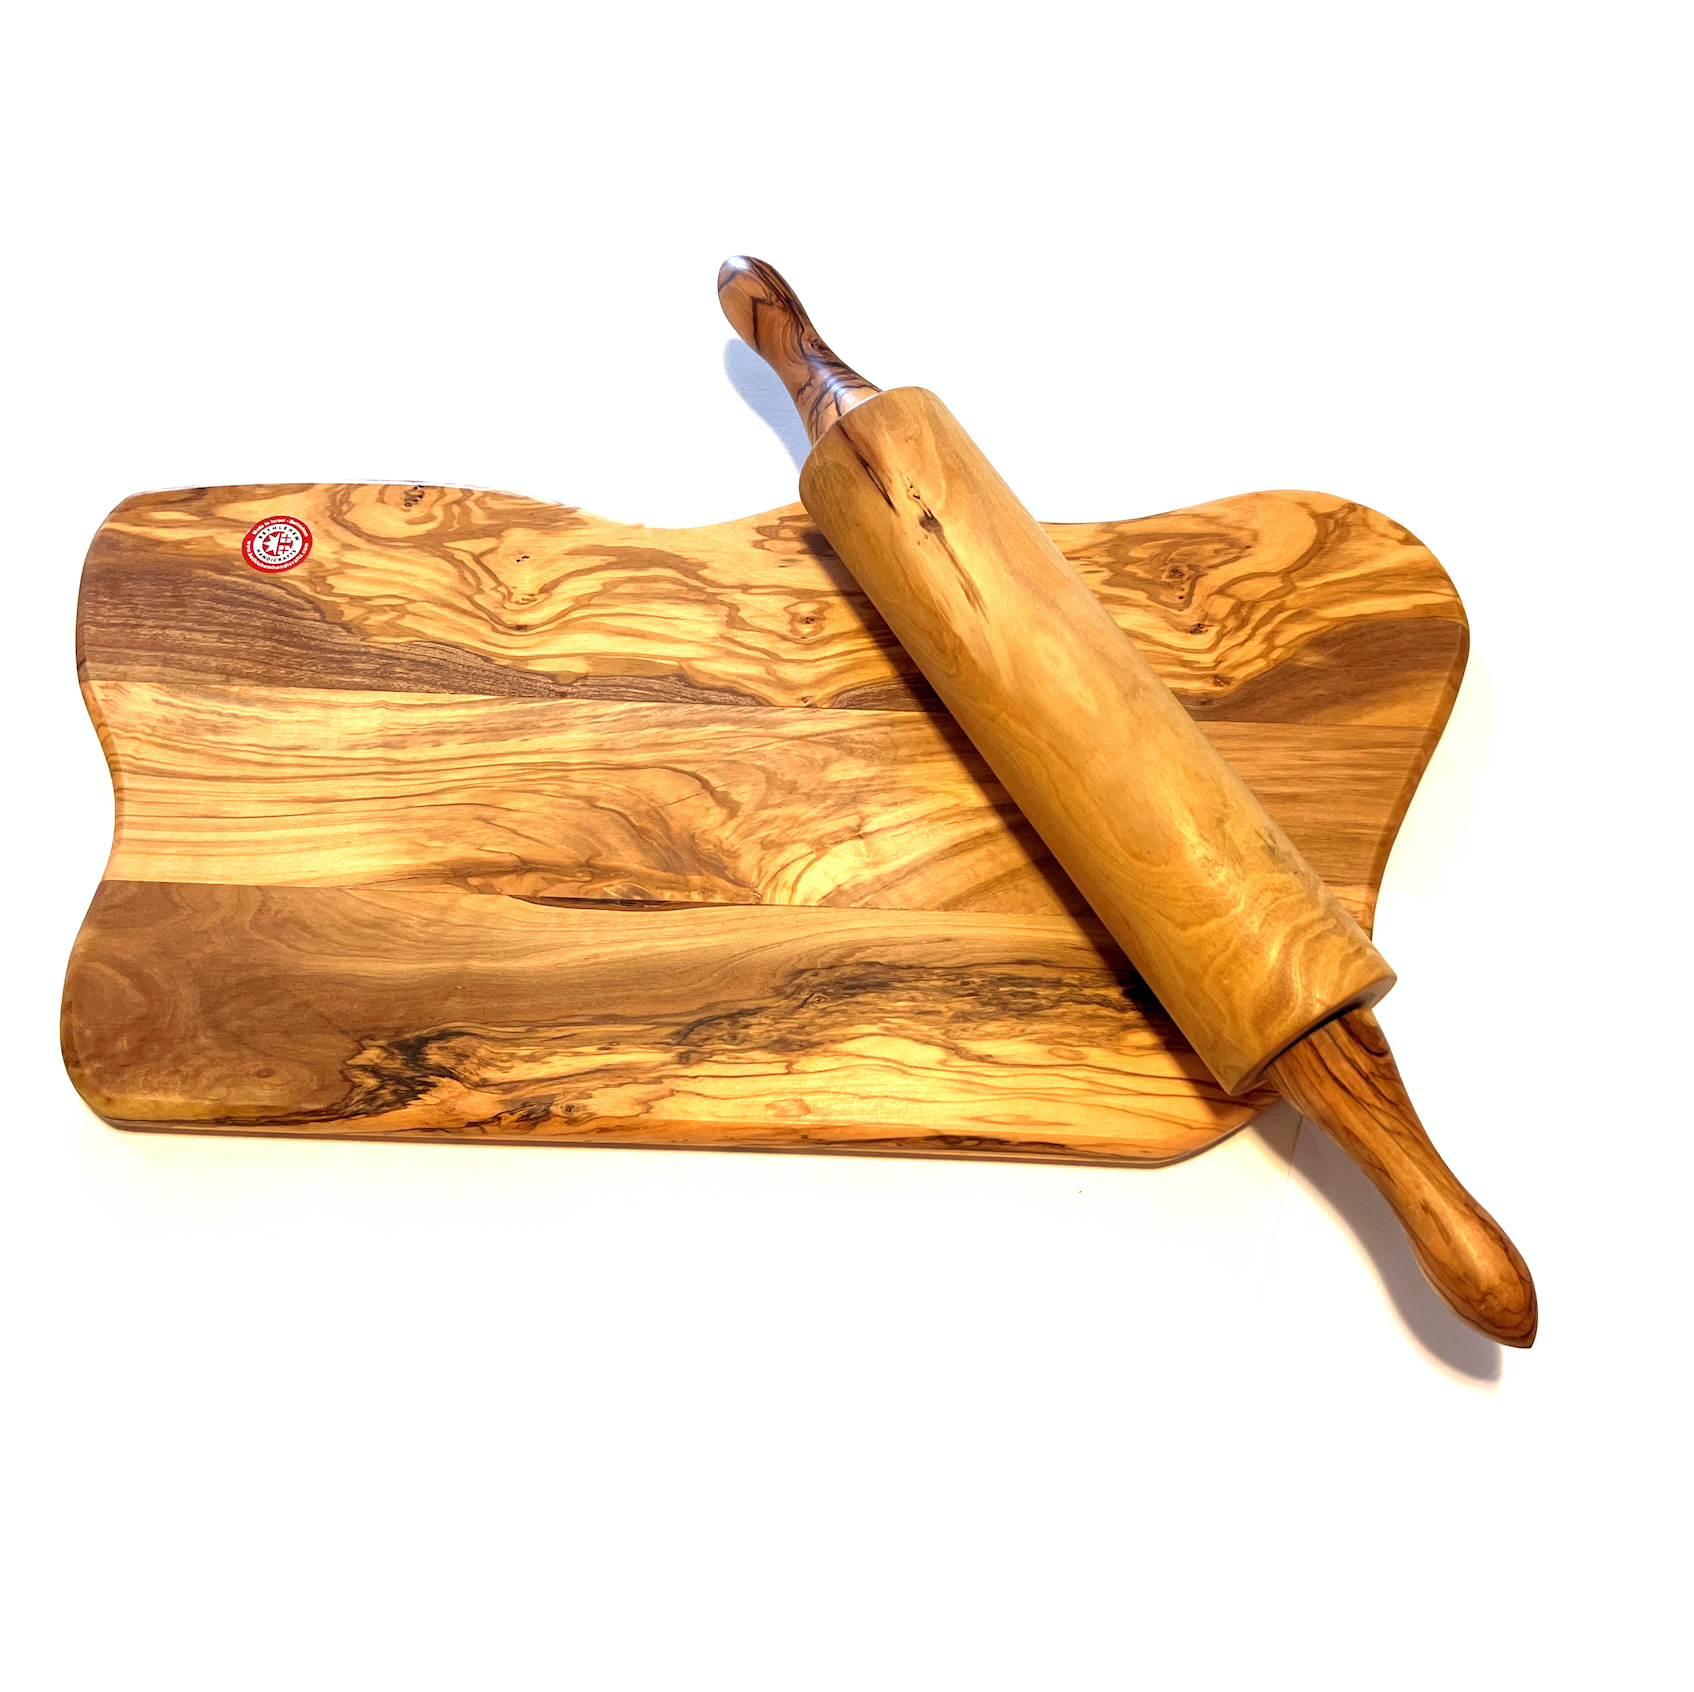 Wooden Cutting Boards / Charcuterie Board ( Set of 3) Handmade from Olive  Wood Grown in Holy Land